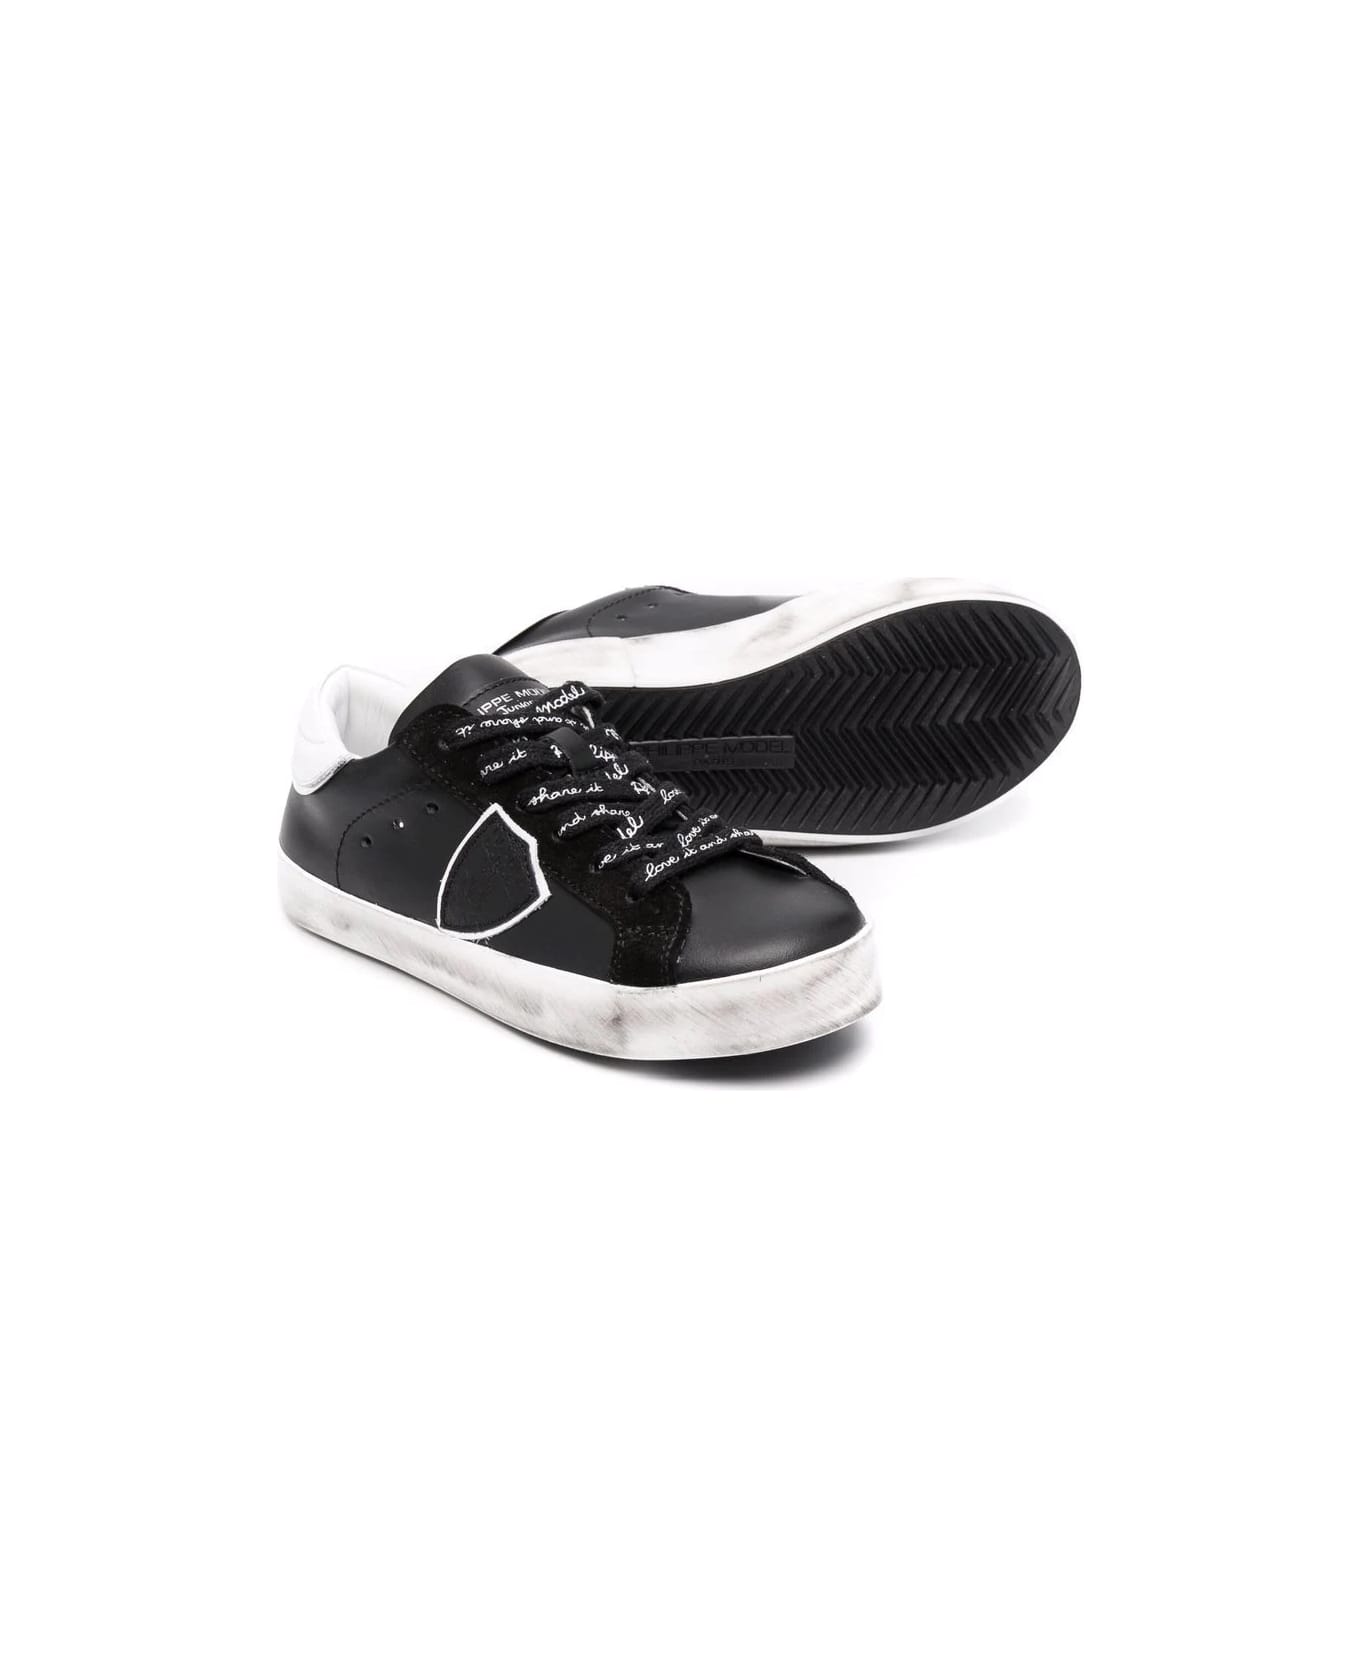 Philippe Model Two-tone Sneakers - Black